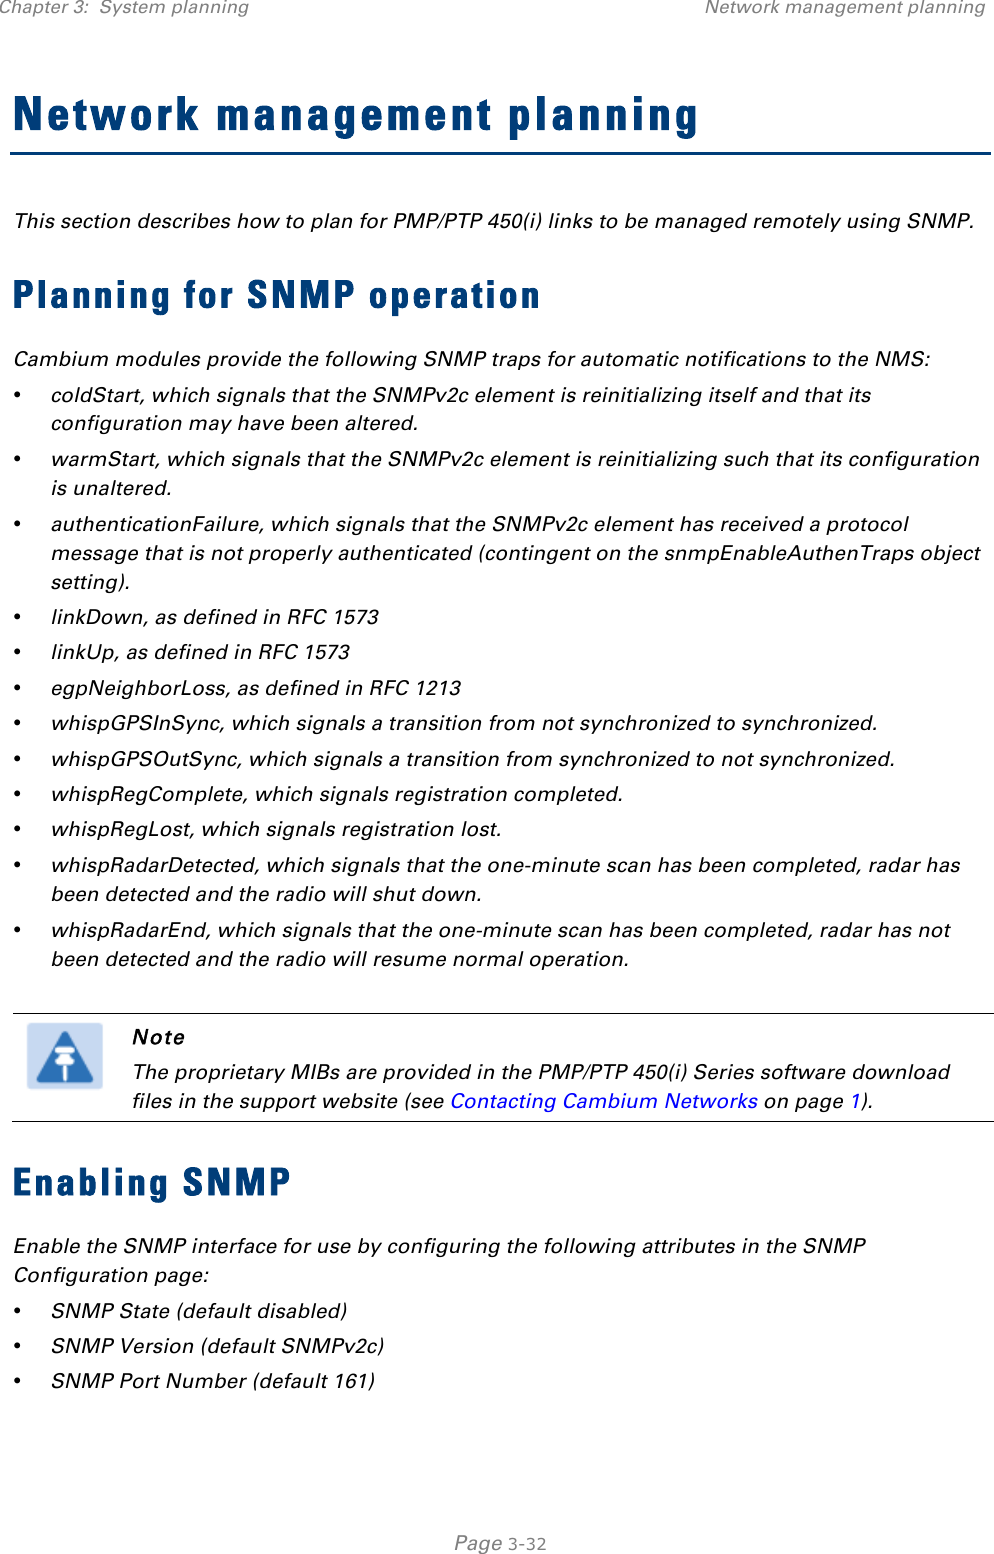 Chapter 3:  System planning Network management planning   Page 3-32 Network management planning This section describes how to plan for PMP/PTP 450(i) links to be managed remotely using SNMP. Planning for SNMP operation Cambium modules provide the following SNMP traps for automatic notifications to the NMS: • coldStart, which signals that the SNMPv2c element is reinitializing itself and that its configuration may have been altered. • warmStart, which signals that the SNMPv2c element is reinitializing such that its configuration is unaltered. • authenticationFailure, which signals that the SNMPv2c element has received a protocol message that is not properly authenticated (contingent on the snmpEnableAuthenTraps object setting). • linkDown, as defined in RFC 1573 • linkUp, as defined in RFC 1573 • egpNeighborLoss, as defined in RFC 1213 • whispGPSInSync, which signals a transition from not synchronized to synchronized. • whispGPSOutSync, which signals a transition from synchronized to not synchronized. • whispRegComplete, which signals registration completed.  • whispRegLost, which signals registration lost.  • whispRadarDetected, which signals that the one-minute scan has been completed, radar has been detected and the radio will shut down.  • whispRadarEnd, which signals that the one-minute scan has been completed, radar has not been detected and the radio will resume normal operation.    Note The proprietary MIBs are provided in the PMP/PTP 450(i) Series software download files in the support website (see Contacting Cambium Networks on page 1). Enabling SNMP Enable the SNMP interface for use by configuring the following attributes in the SNMP Configuration page: • SNMP State (default disabled) • SNMP Version (default SNMPv2c) • SNMP Port Number (default 161) 